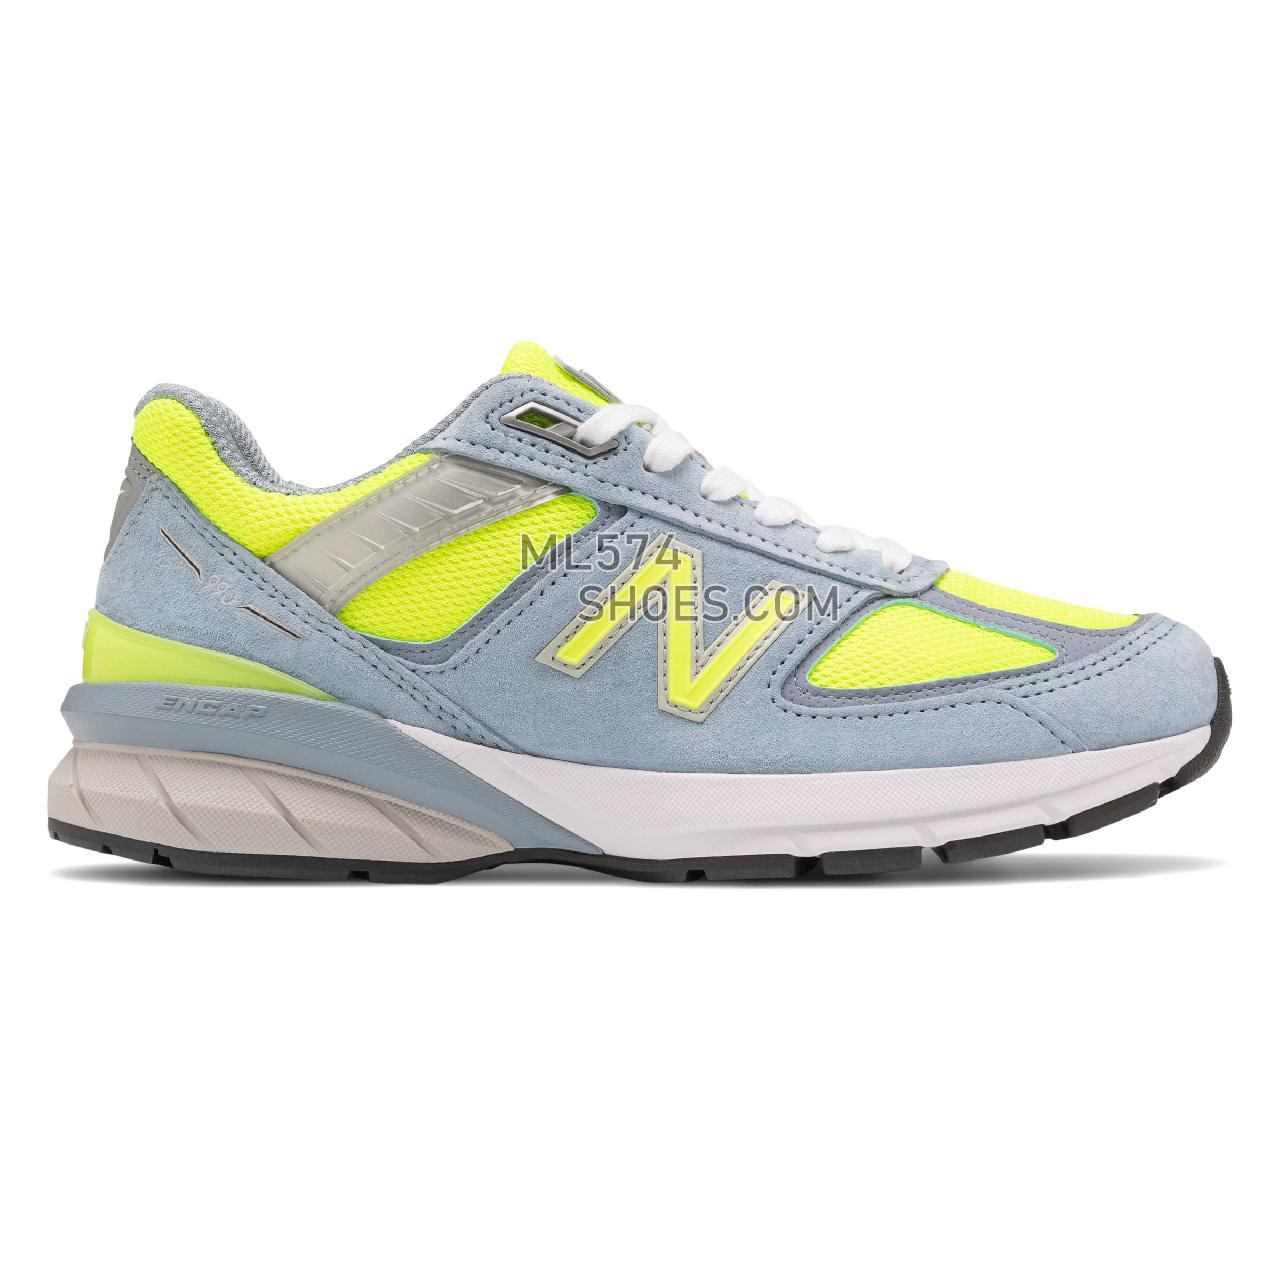 New Balance Made in USA 990v5 - Women's Made in USA And UK Sneakers - Grey with Hi-lite - W990GH5